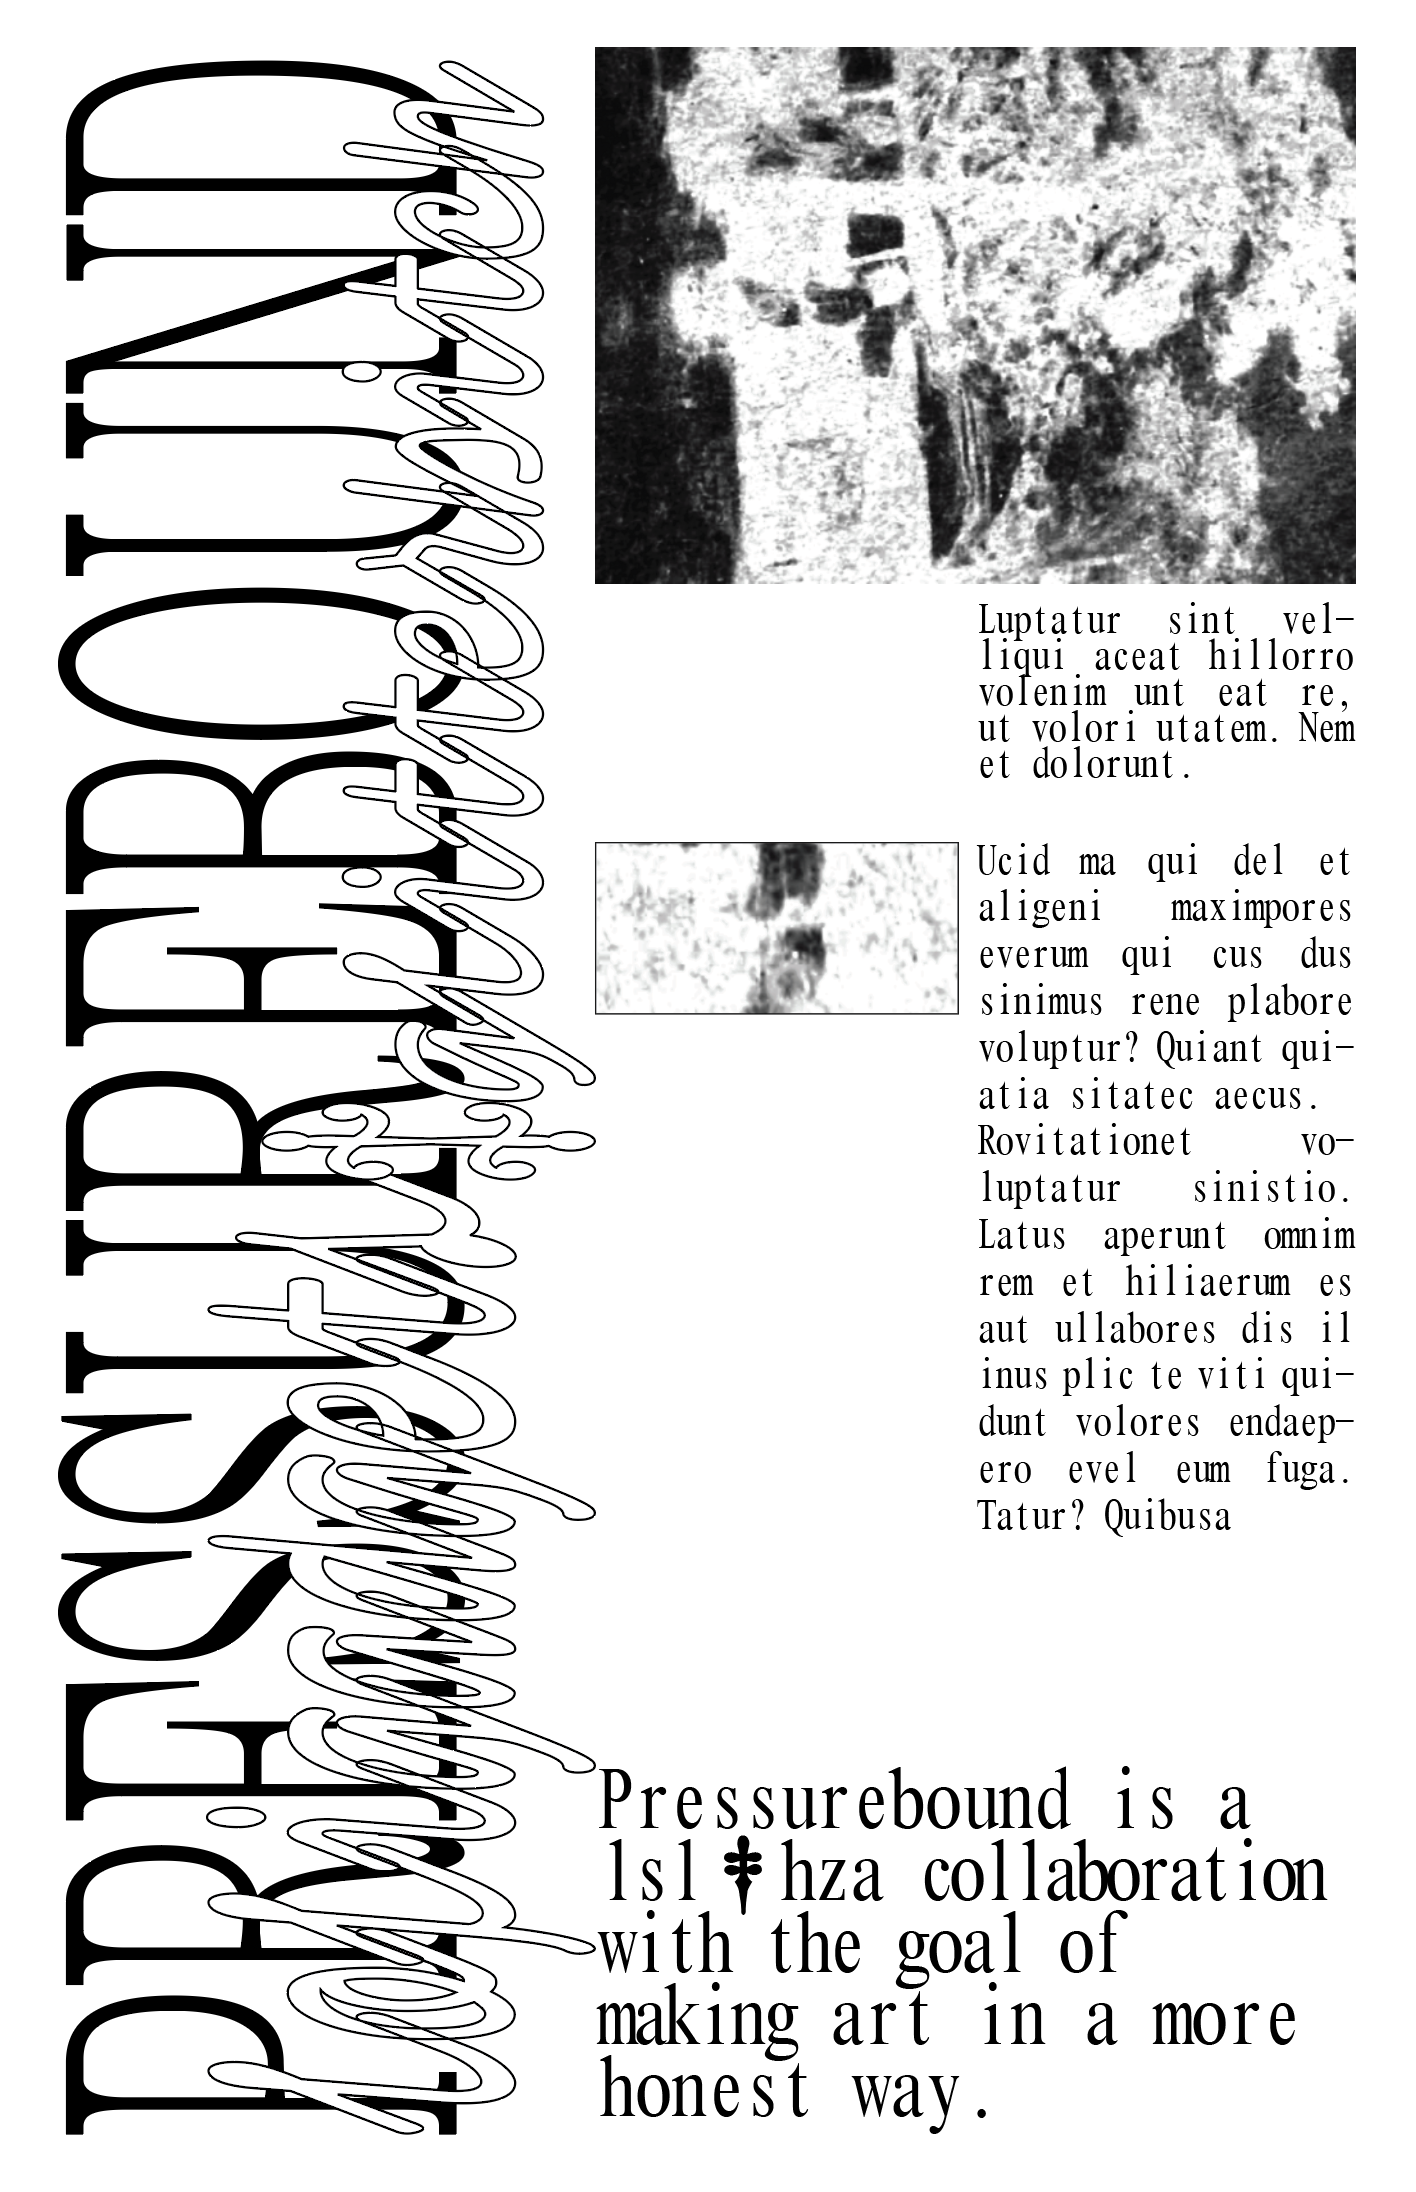 Screenshot of a draft of a poster, in black text/images on a white background. 'PRESSUREBOUND' stretched narrow and rotated on its side to sit at the left, taking up a column of space; entangled with it are the words 'lofigadgets' and 'glitterbitch' in a slightly bubbly font. To the top right corner is an unidentifiable image (likely a closeup of something) with two snippets of text stacked below. At the bottom right is the text 'Pressurebound is a lsl & hza collaboration with the goal of making art in a more honest way', where the & is replaced by a dagger symbol.